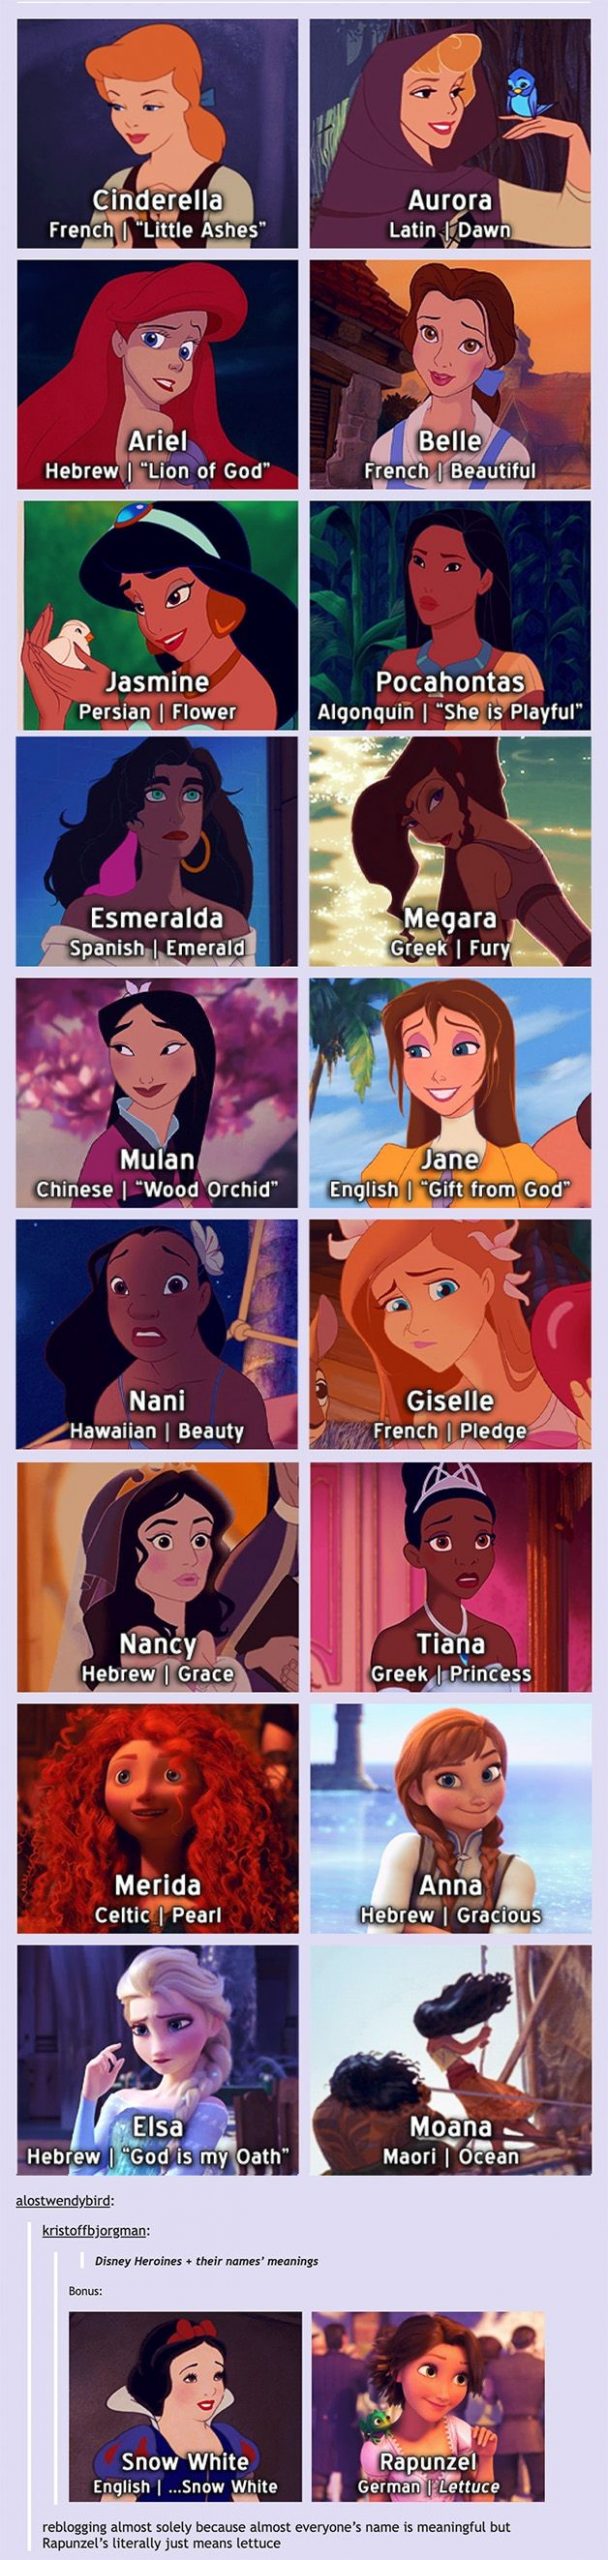 Disney princess names' language and meanings.